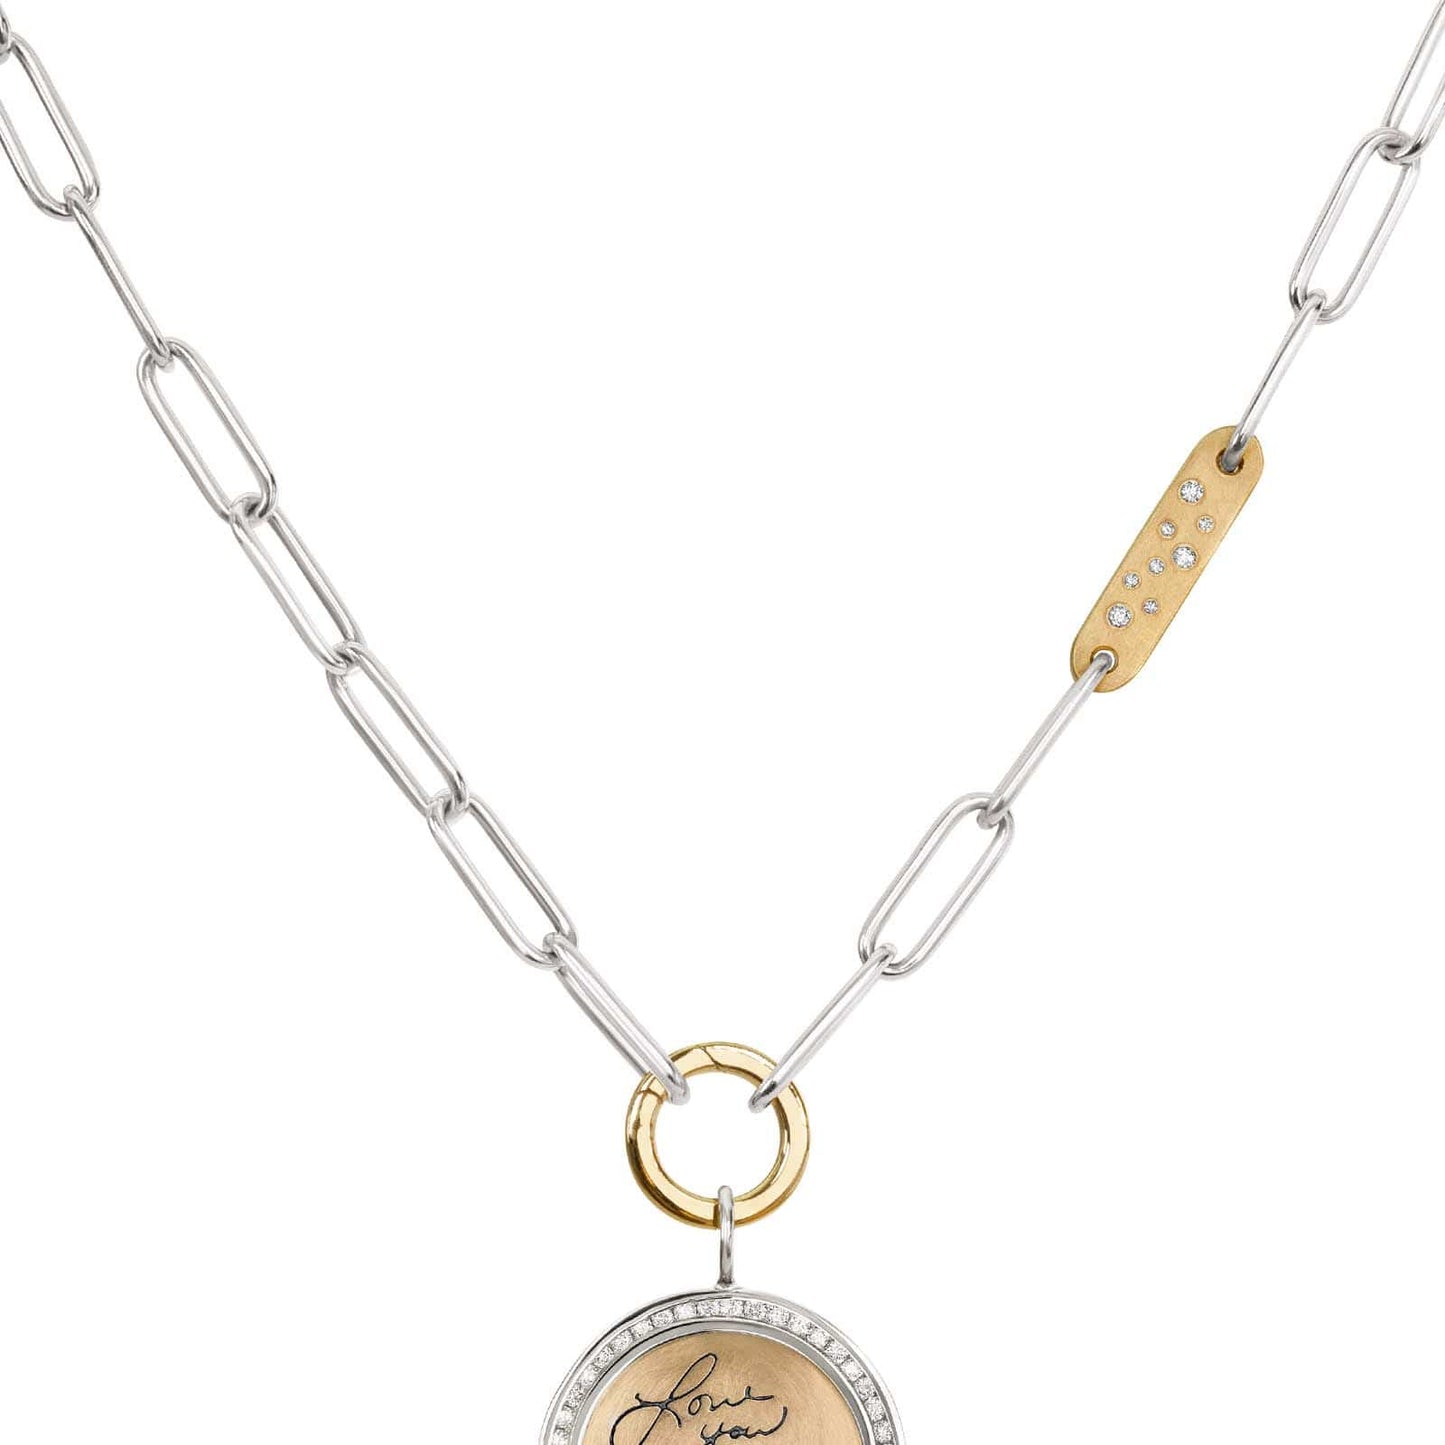 NKL-14K 5.2mm Sterling Silver Chain with 14k Gold Charm Clip